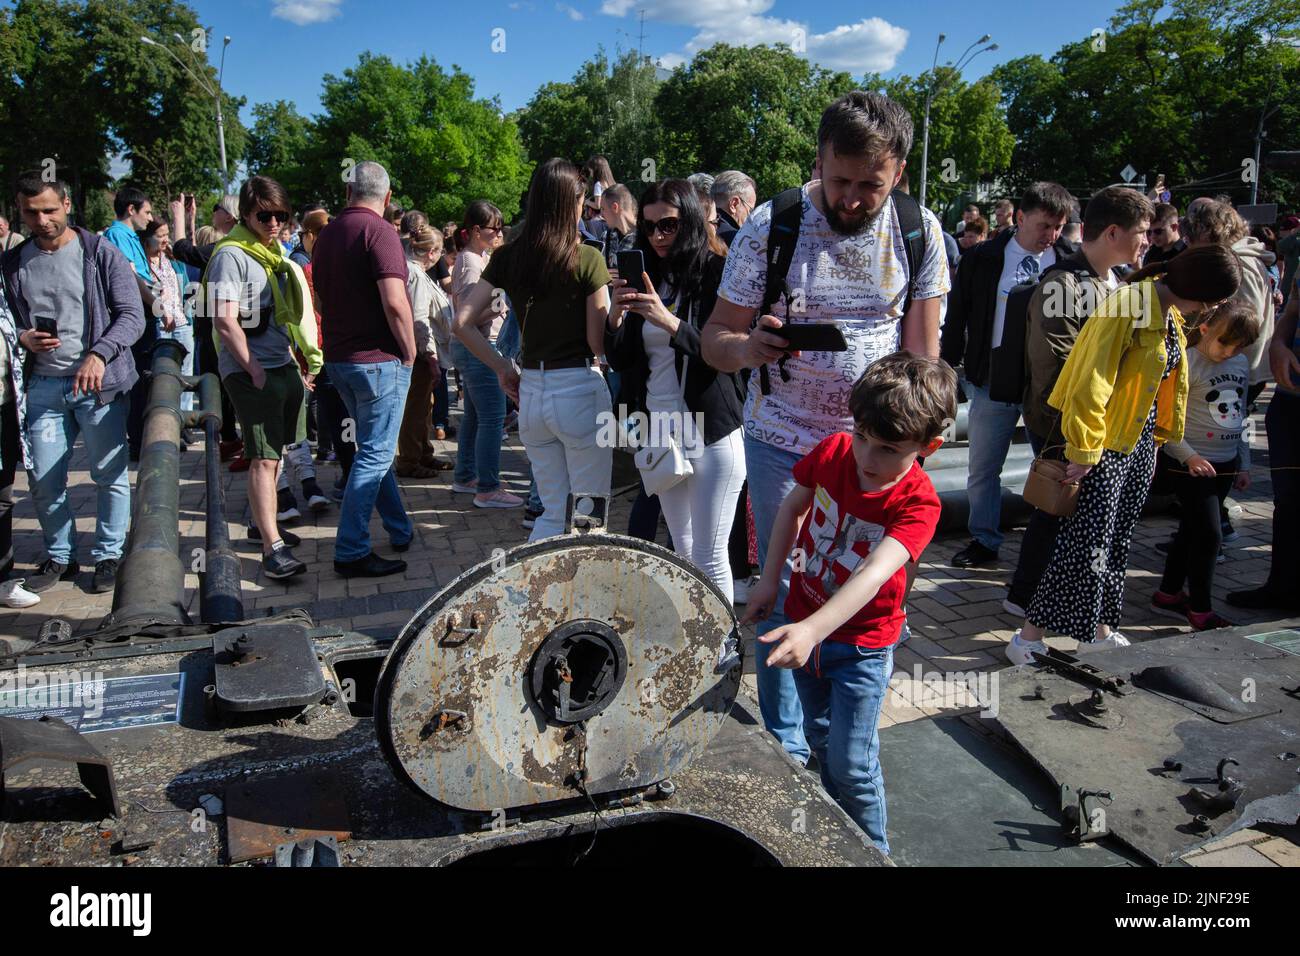 People look at fragments of a destroyed Russian tank during an exhibition showing Russian military hardware destroyed during Russia's invasion of Ukraine in central Kyiv. On February 24, 2022, Russian troops entered Ukrainian territory, starting a conflict that provoked destruction and a humanitarian crisis. Stock Photo